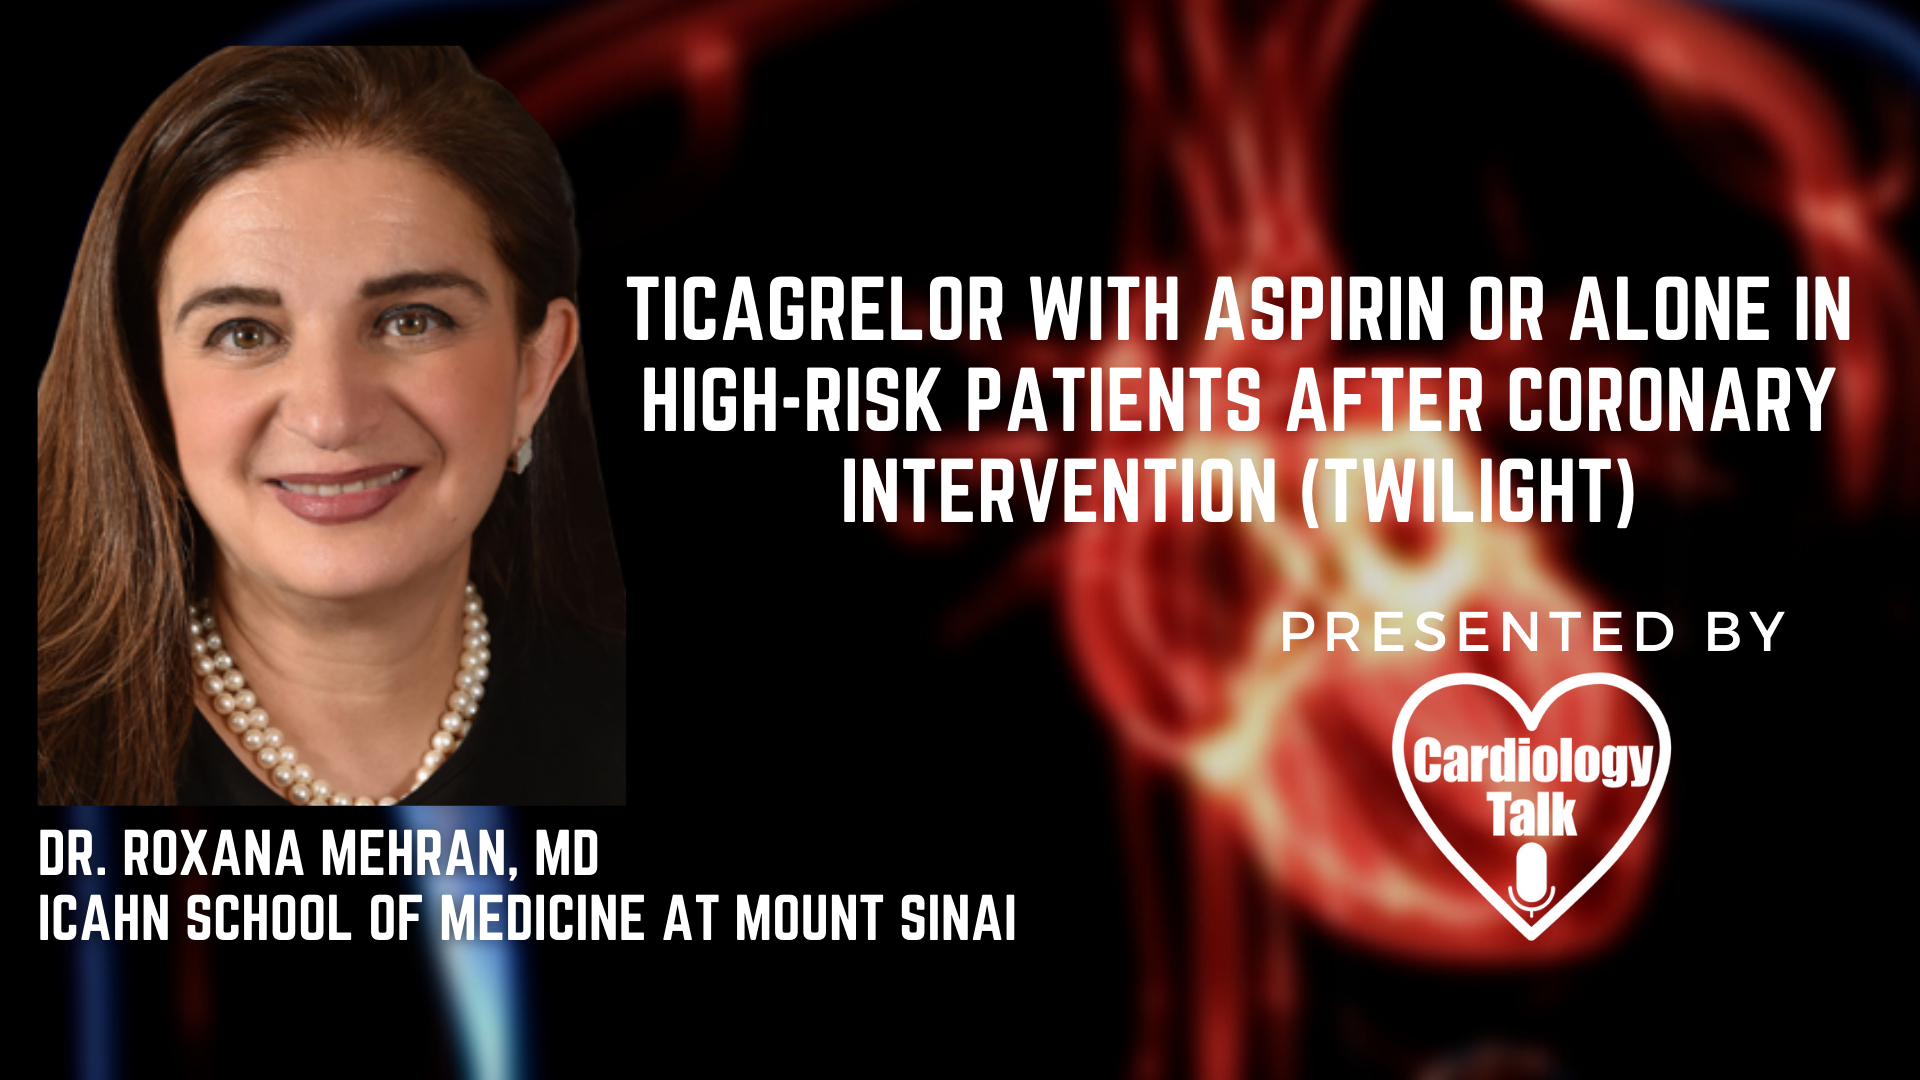 Dr. Roxana Mehran, MD - Ticagrelor With Aspirin or Alone in High-Risk Patients After Coronary Intervention (TWILIGHT)